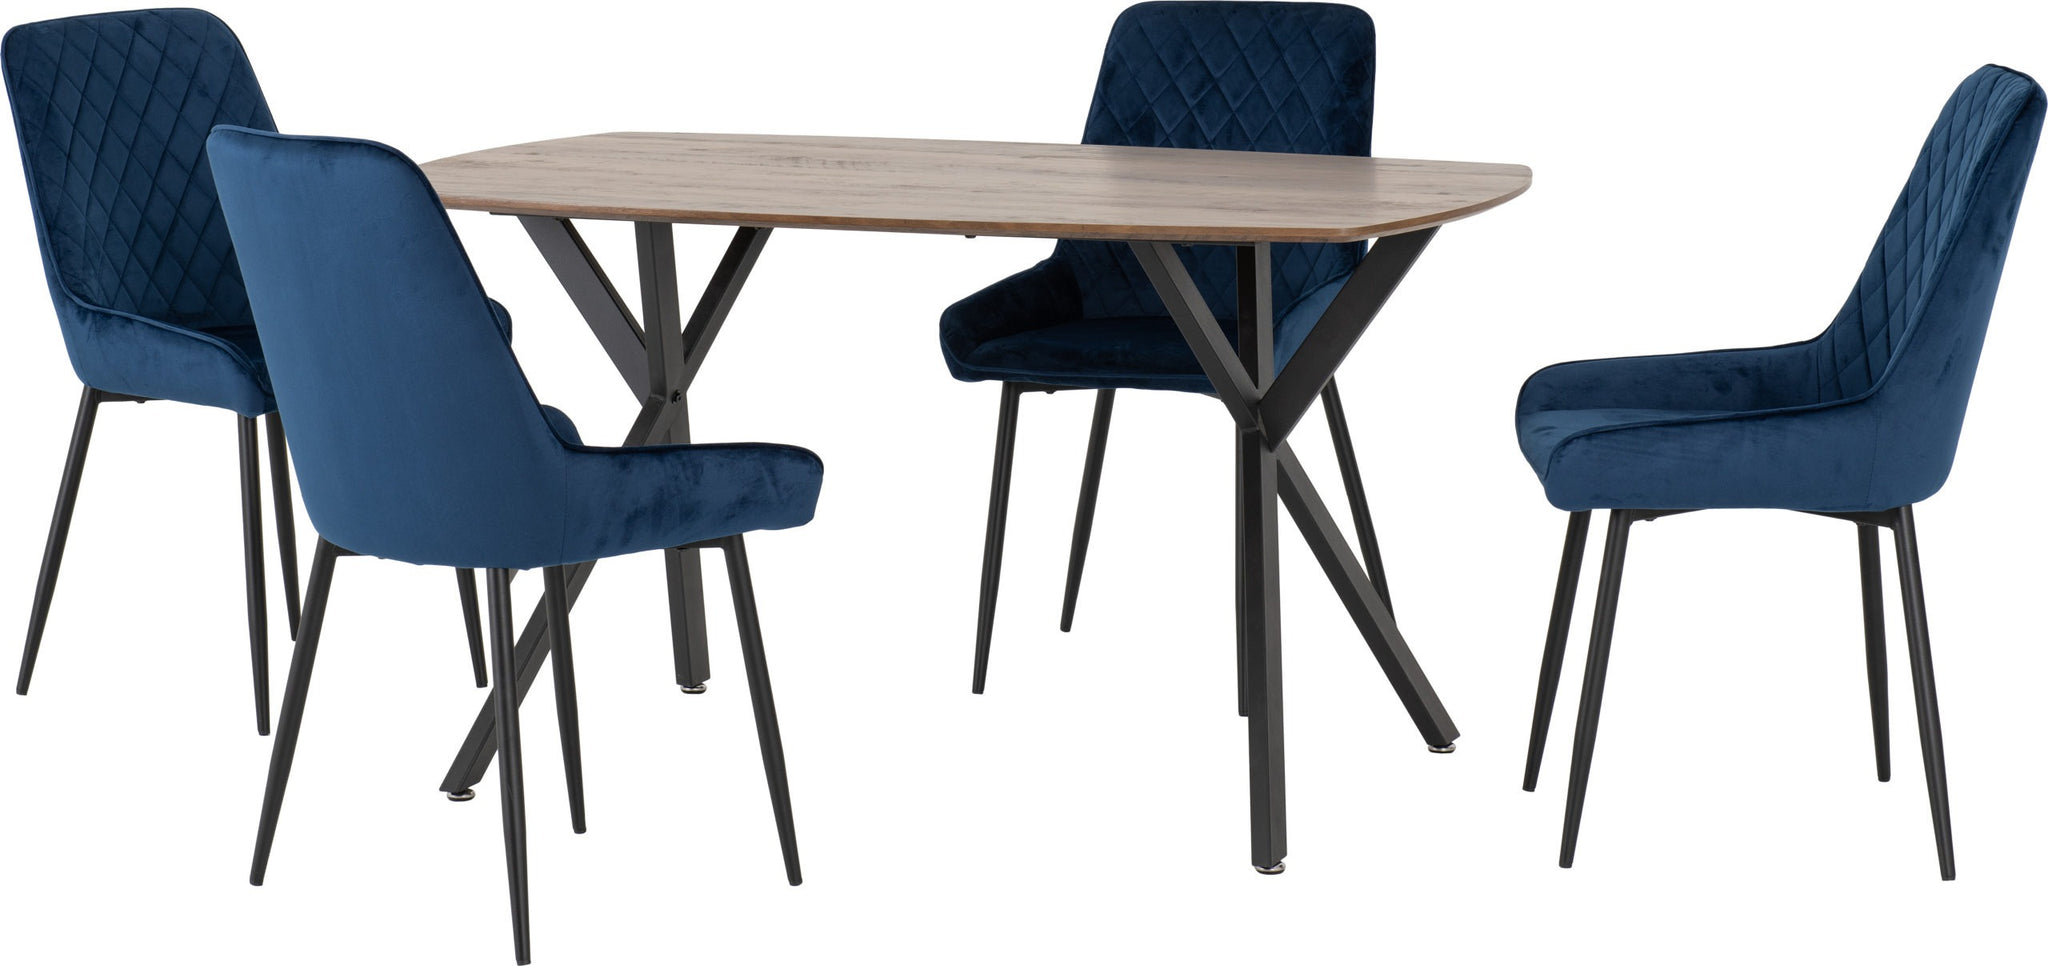 Athens Rectangular Dining Set with Avery Chairs- Medium Oak Effect/Black/Sapphire Blue Velvet- The Right Buy Store